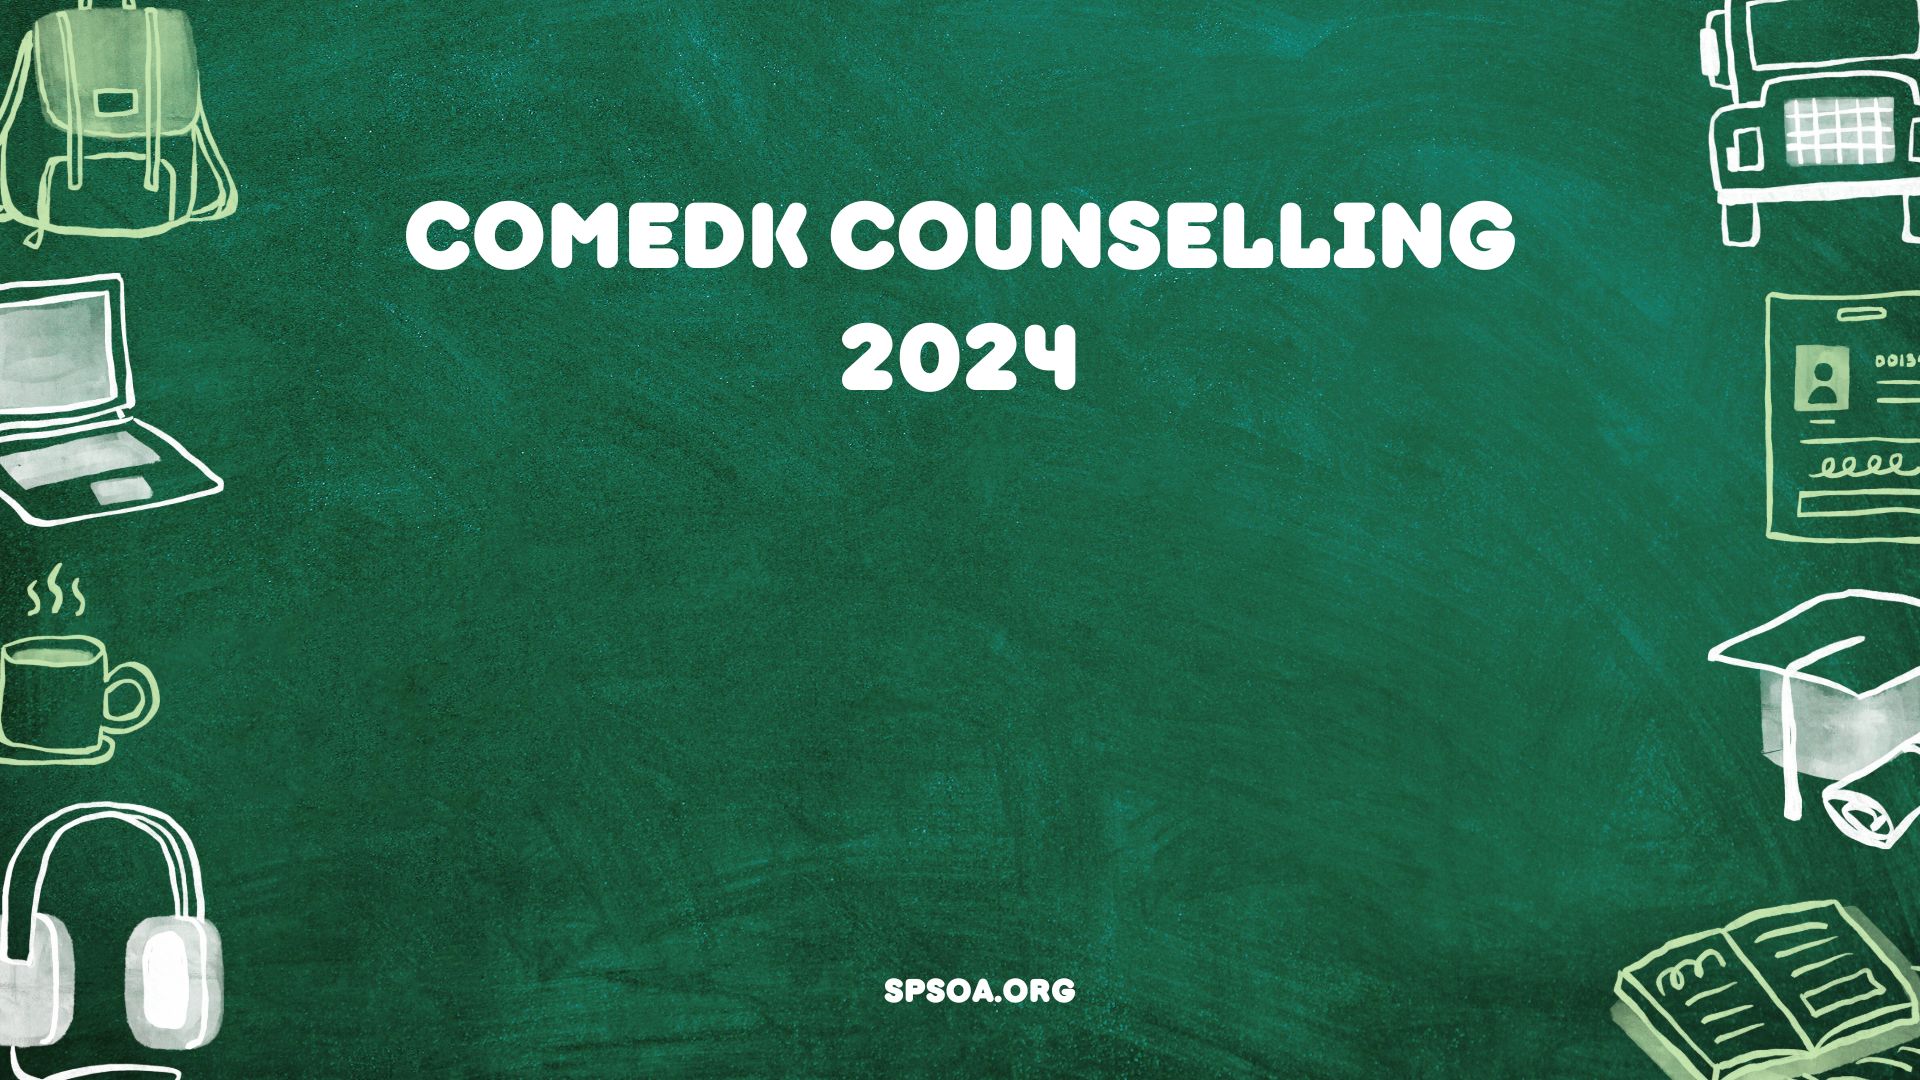 COMEDK Counselling 2024